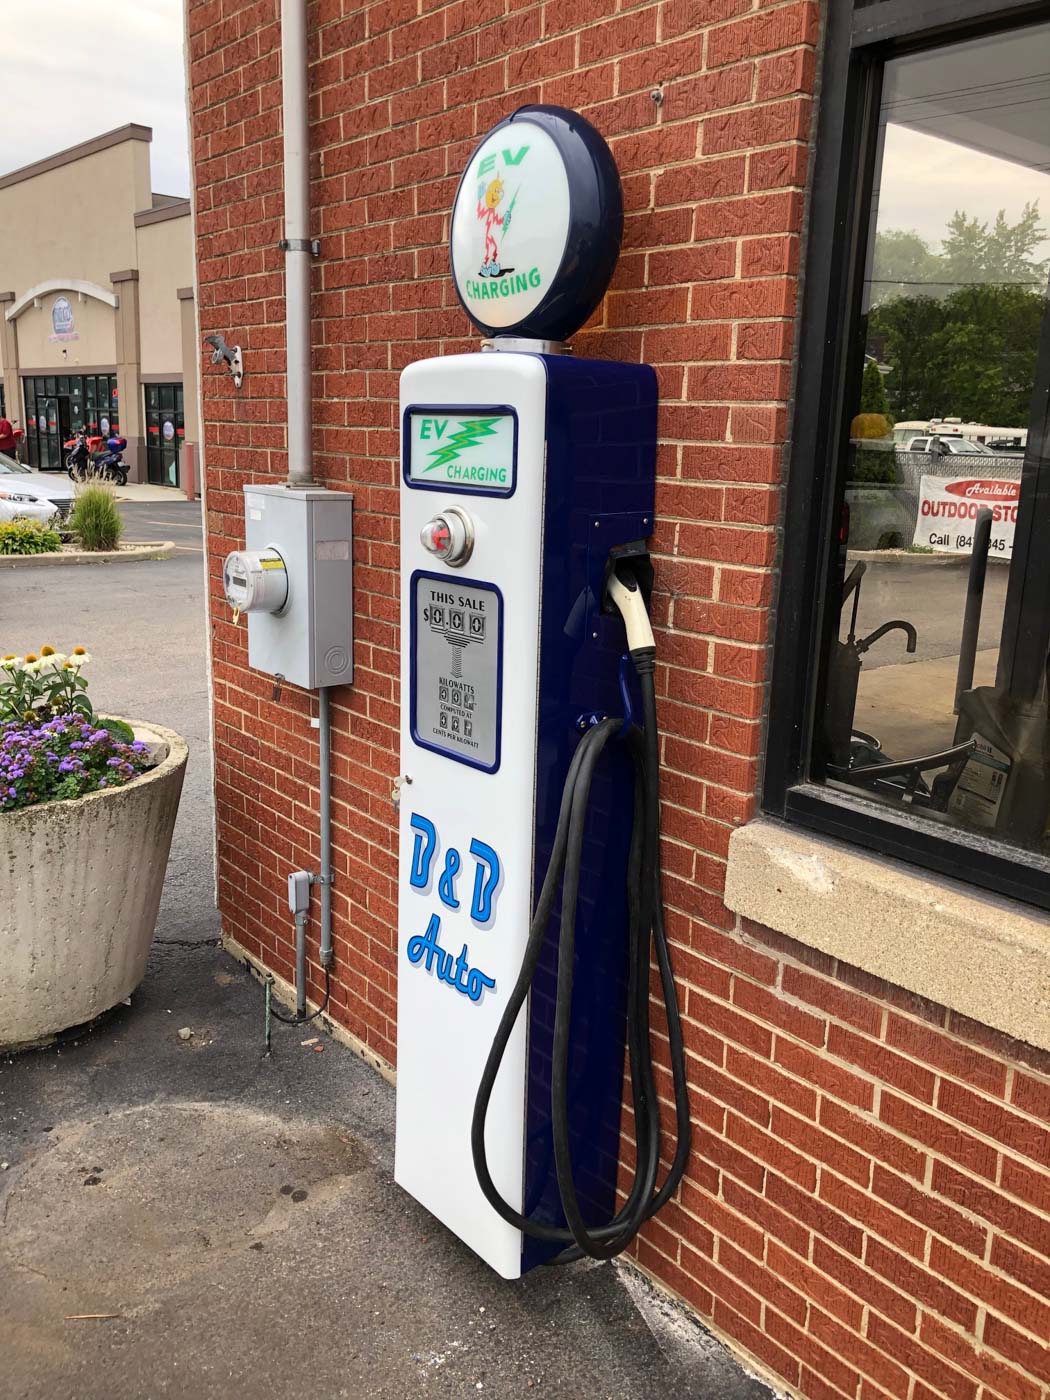 Vintage Gas Pump Transformed into Electric Vehicle Charger! - Steveworks